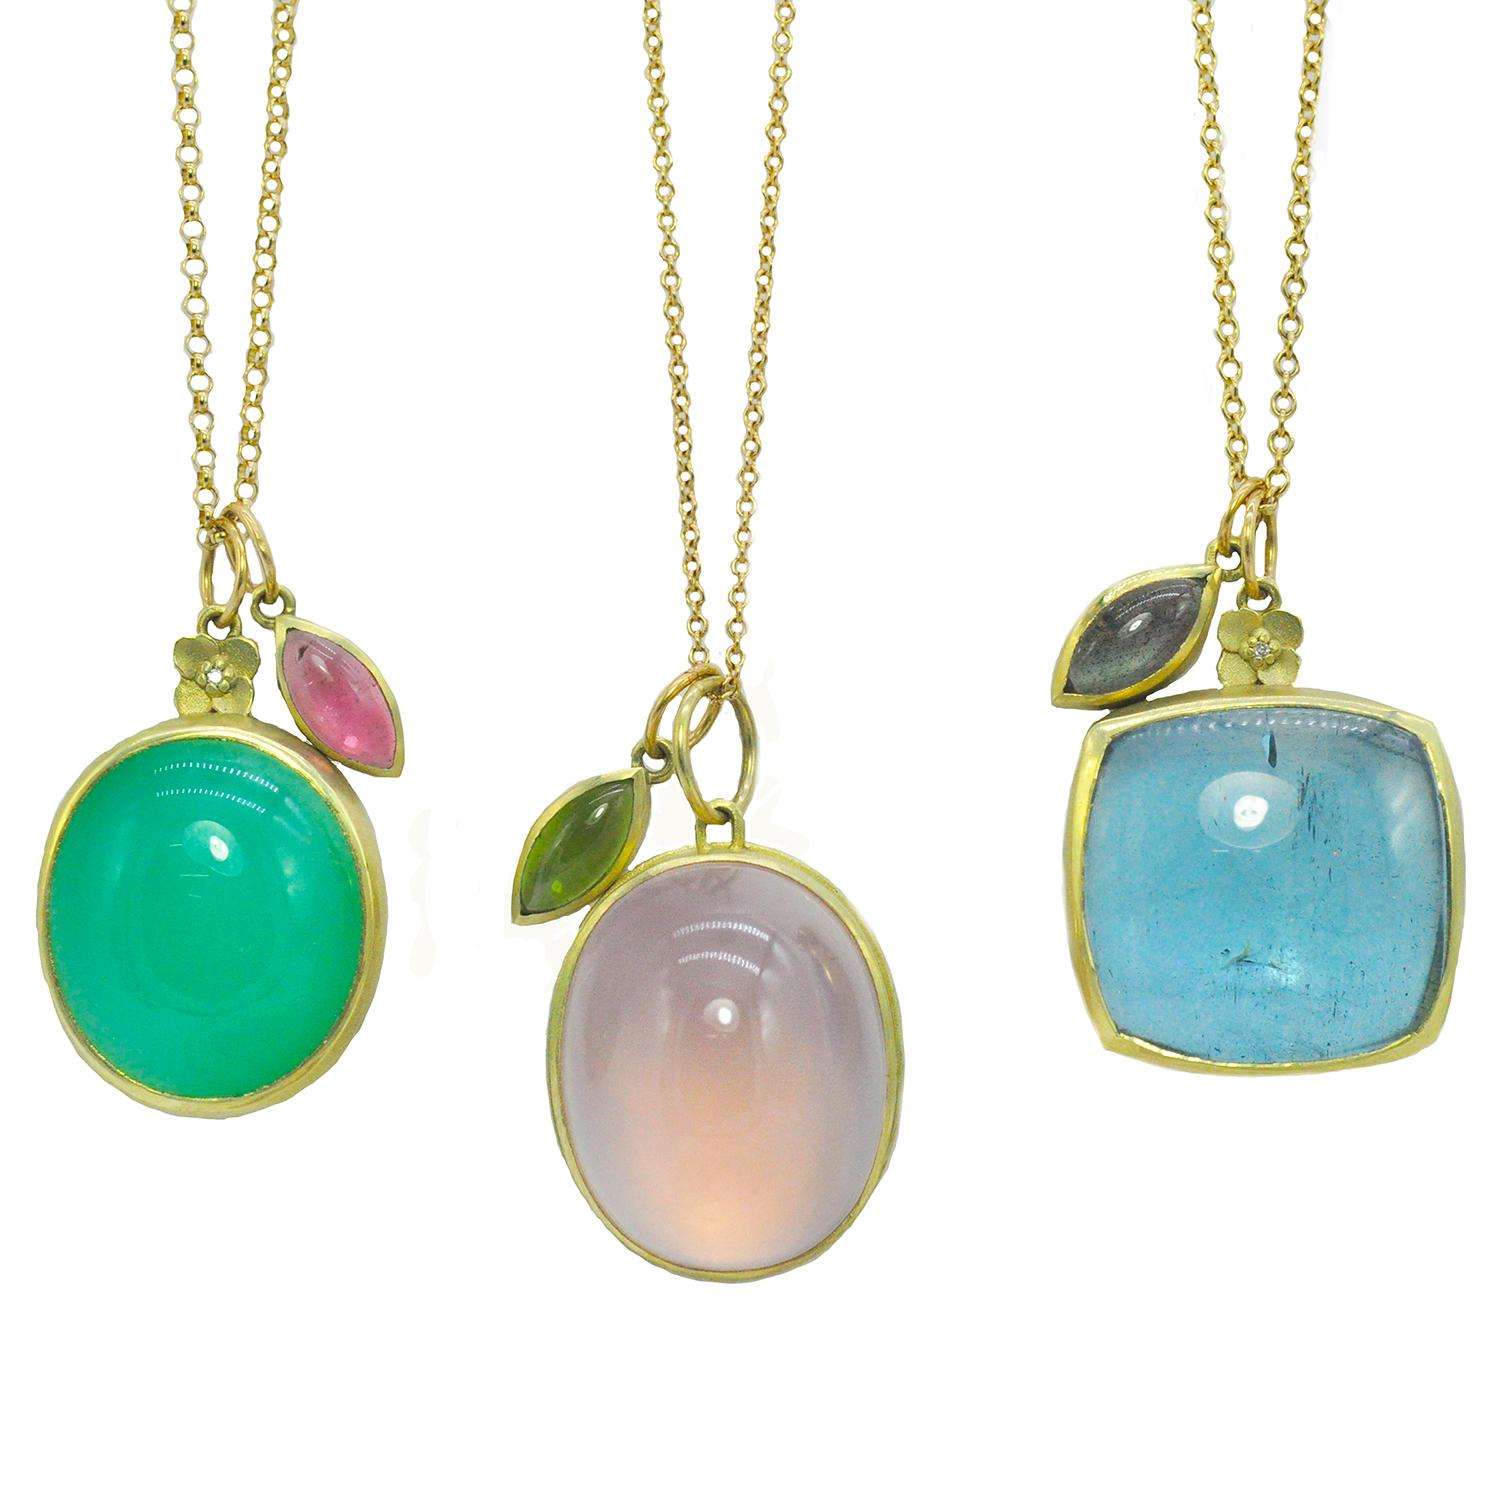 You'll love this colorful charm necklace with designer flair! This botanical gemstone necklace is comprised of a large square aquamarine pendant set in 18k gold with a sweet diamond hydrangea flower topper, paired with a luminous marquis labradorite